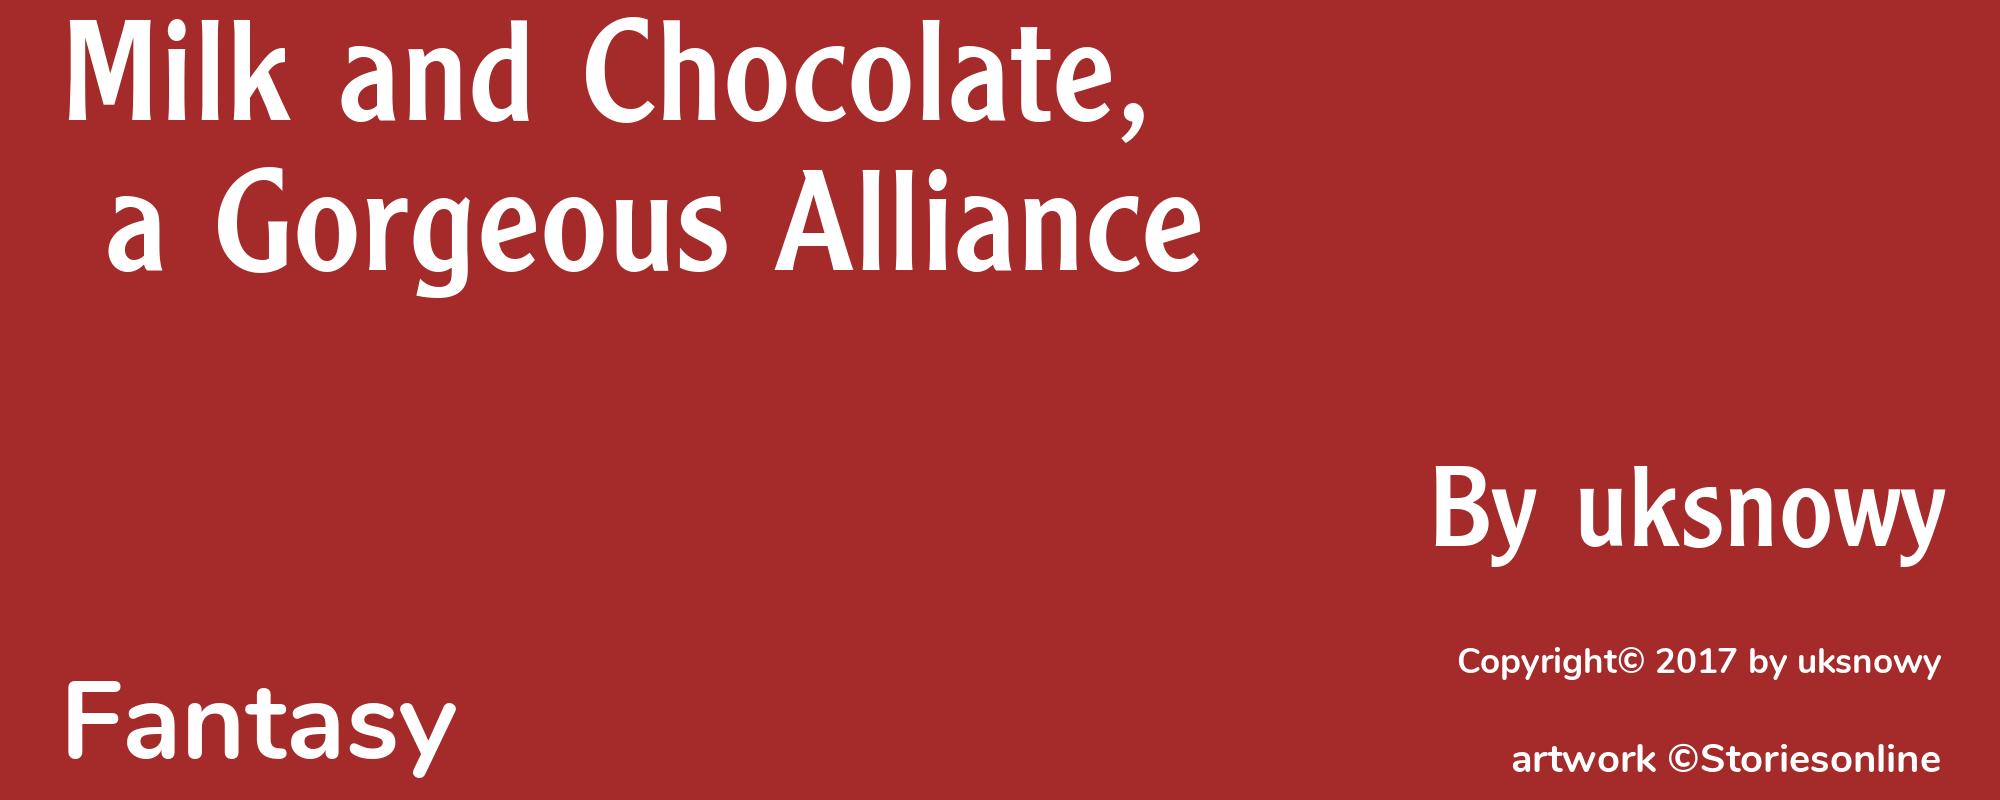 Milk and Chocolate, a Gorgeous Alliance - Cover